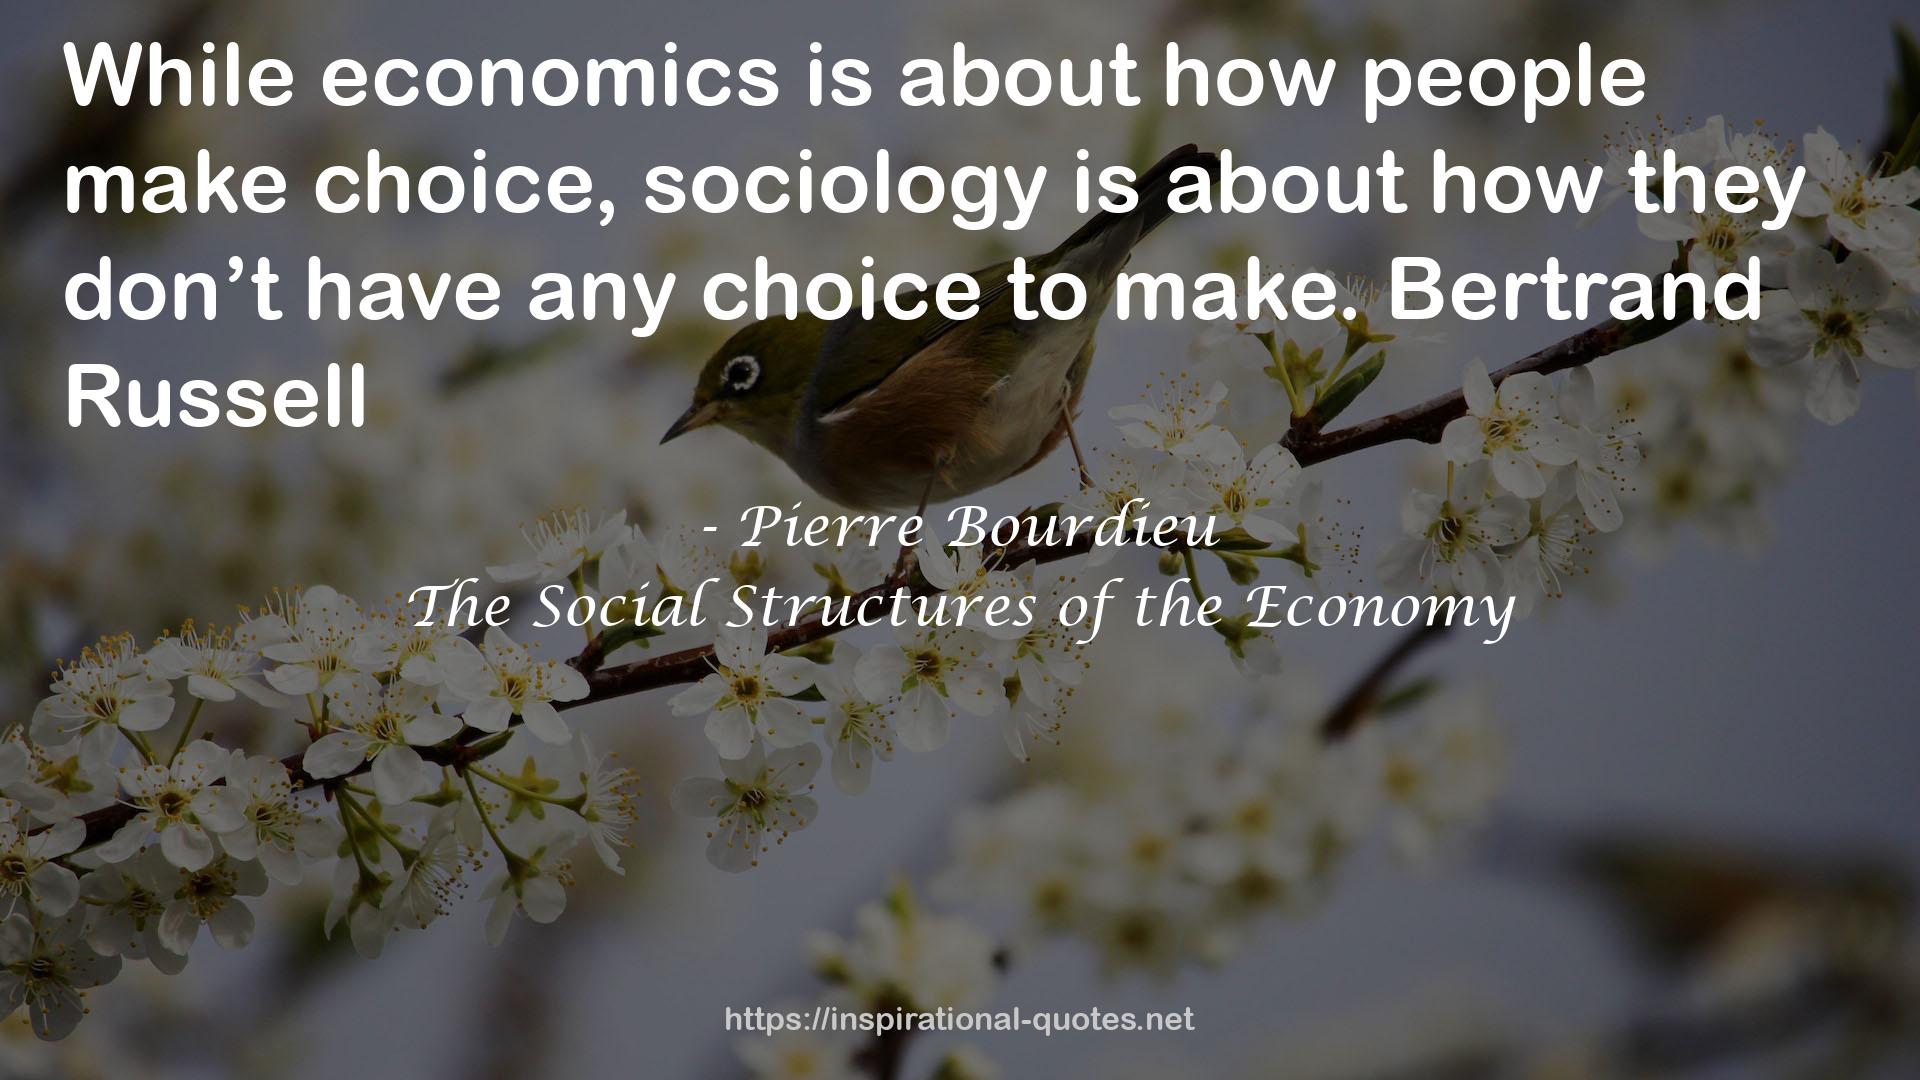 The Social Structures of the Economy QUOTES